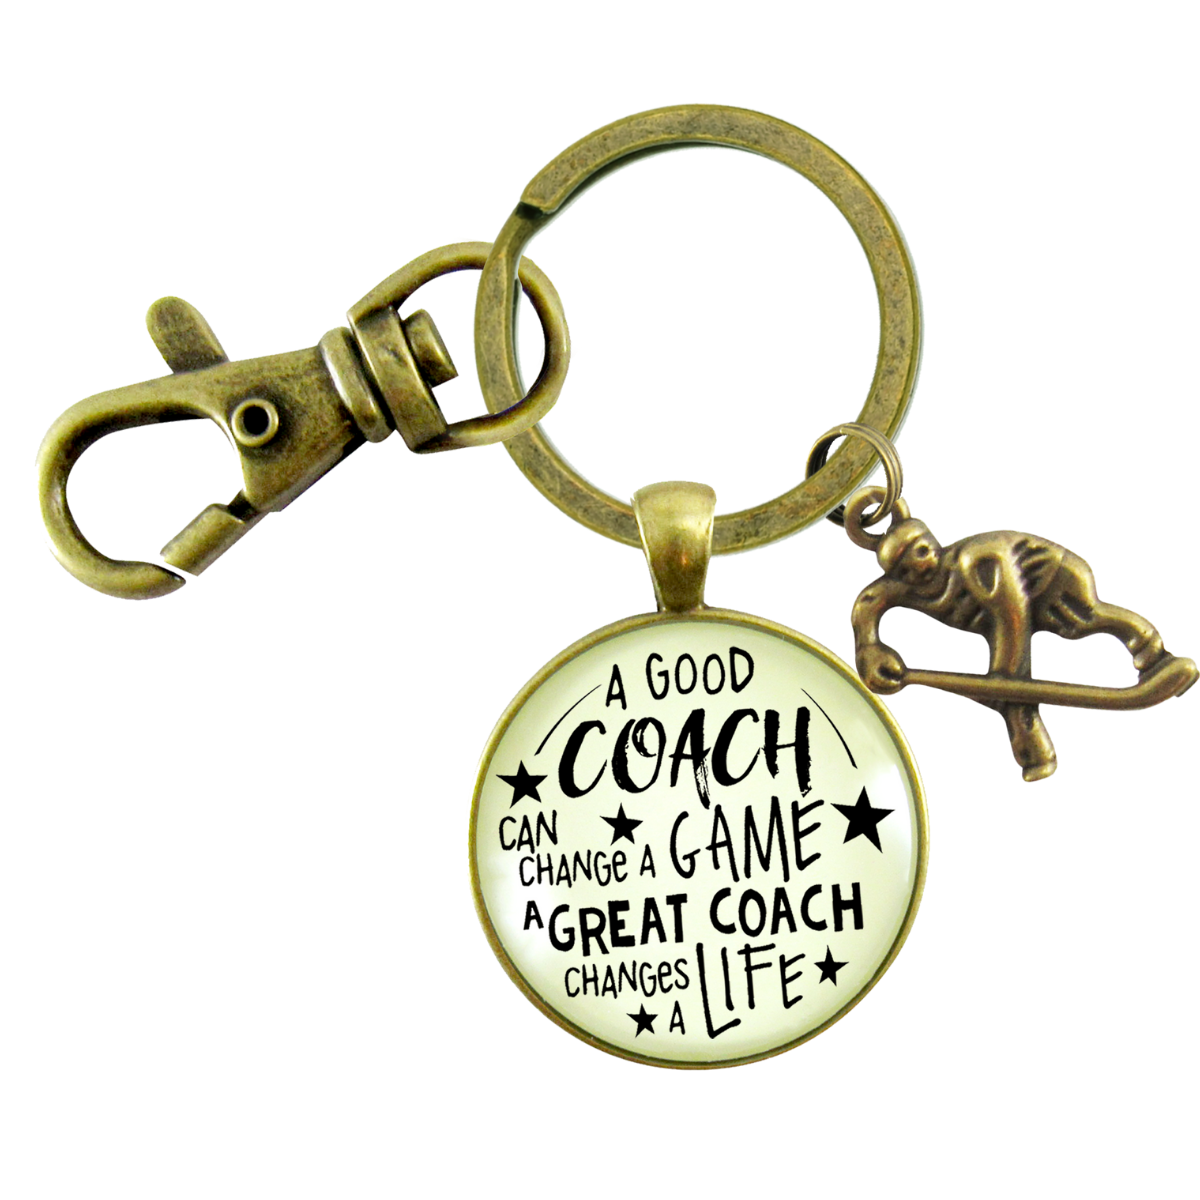 Hockey Coaching Sport Keychain Great Coach Changes Life Thank You Gift - Gutsy Goodness Handmade Jewelry;Hockey Coaching Sport Keychain Great Coach Changes Life Thank You Gift - Gutsy Goodness Handmade Jewelry Gifts